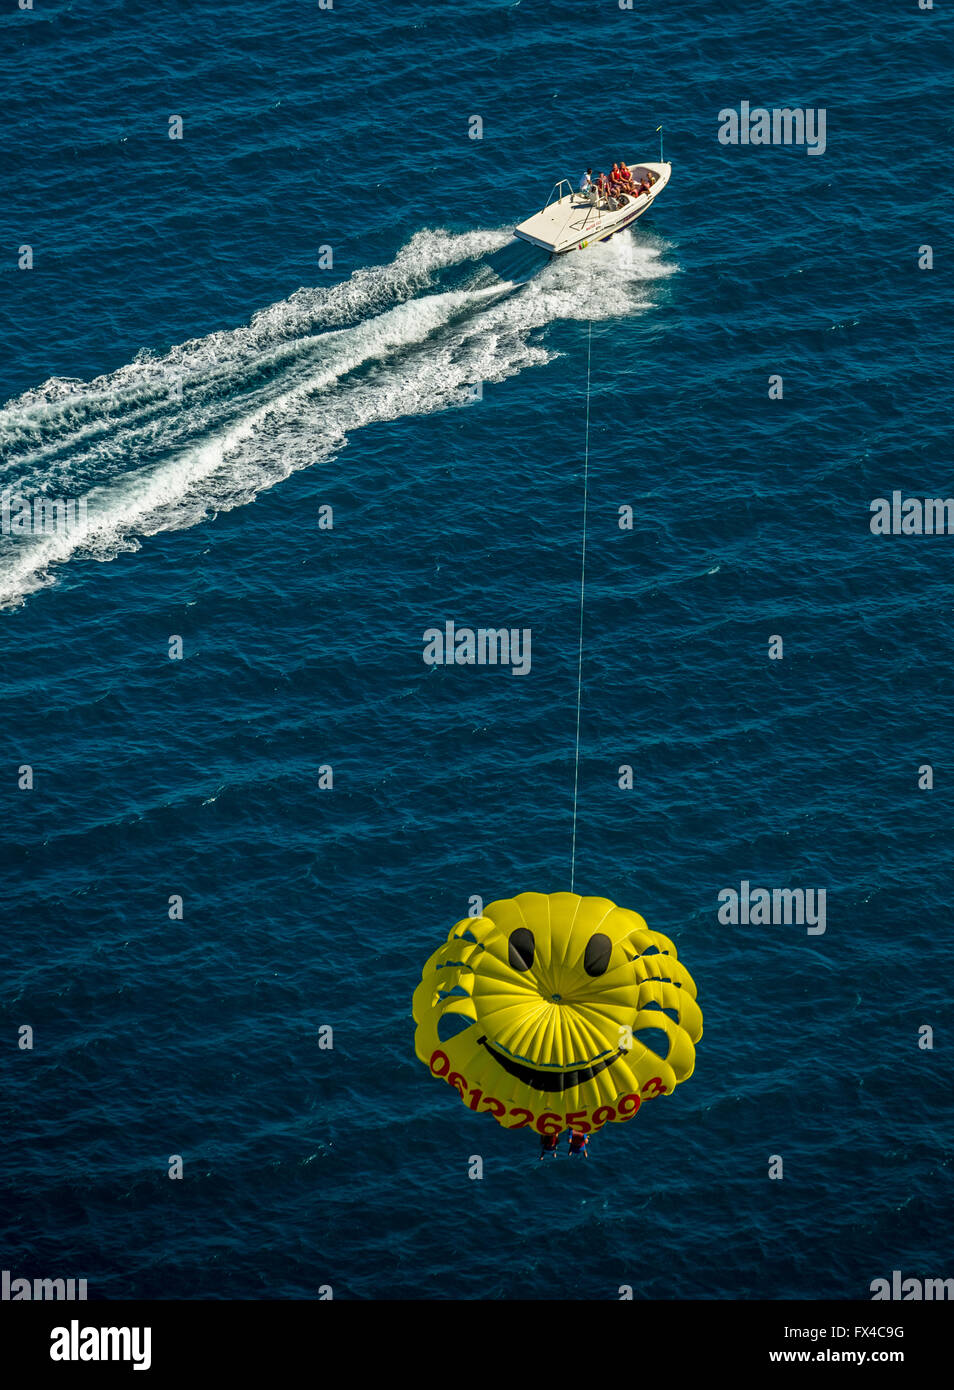 Aerial view, parasailing, parachute with a smiley face drawn by a motor boat, Duo parasailing, Argelès-sur-Mer France Languedoc- Stock Photo